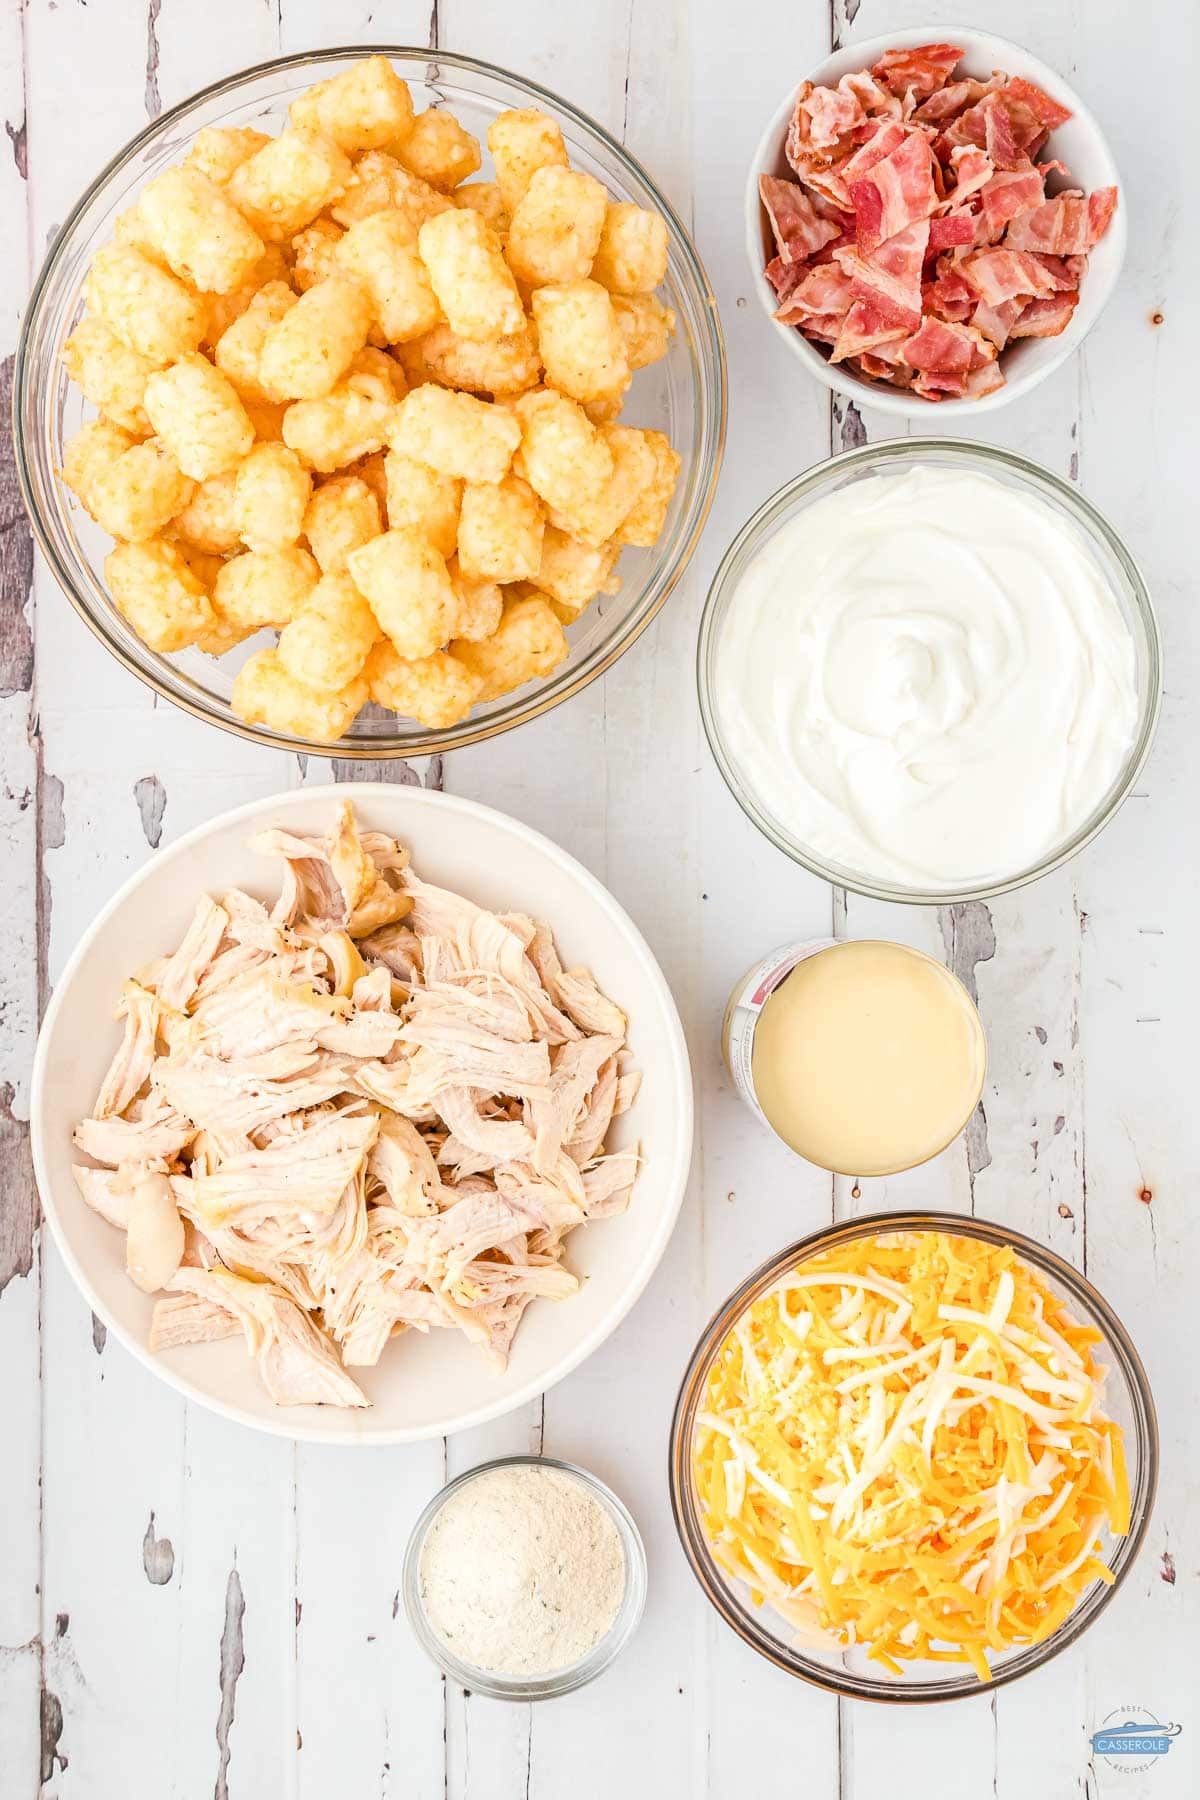 plain chicken, dry ranch dressing mix, and other simple ingredients for a chicken casserole